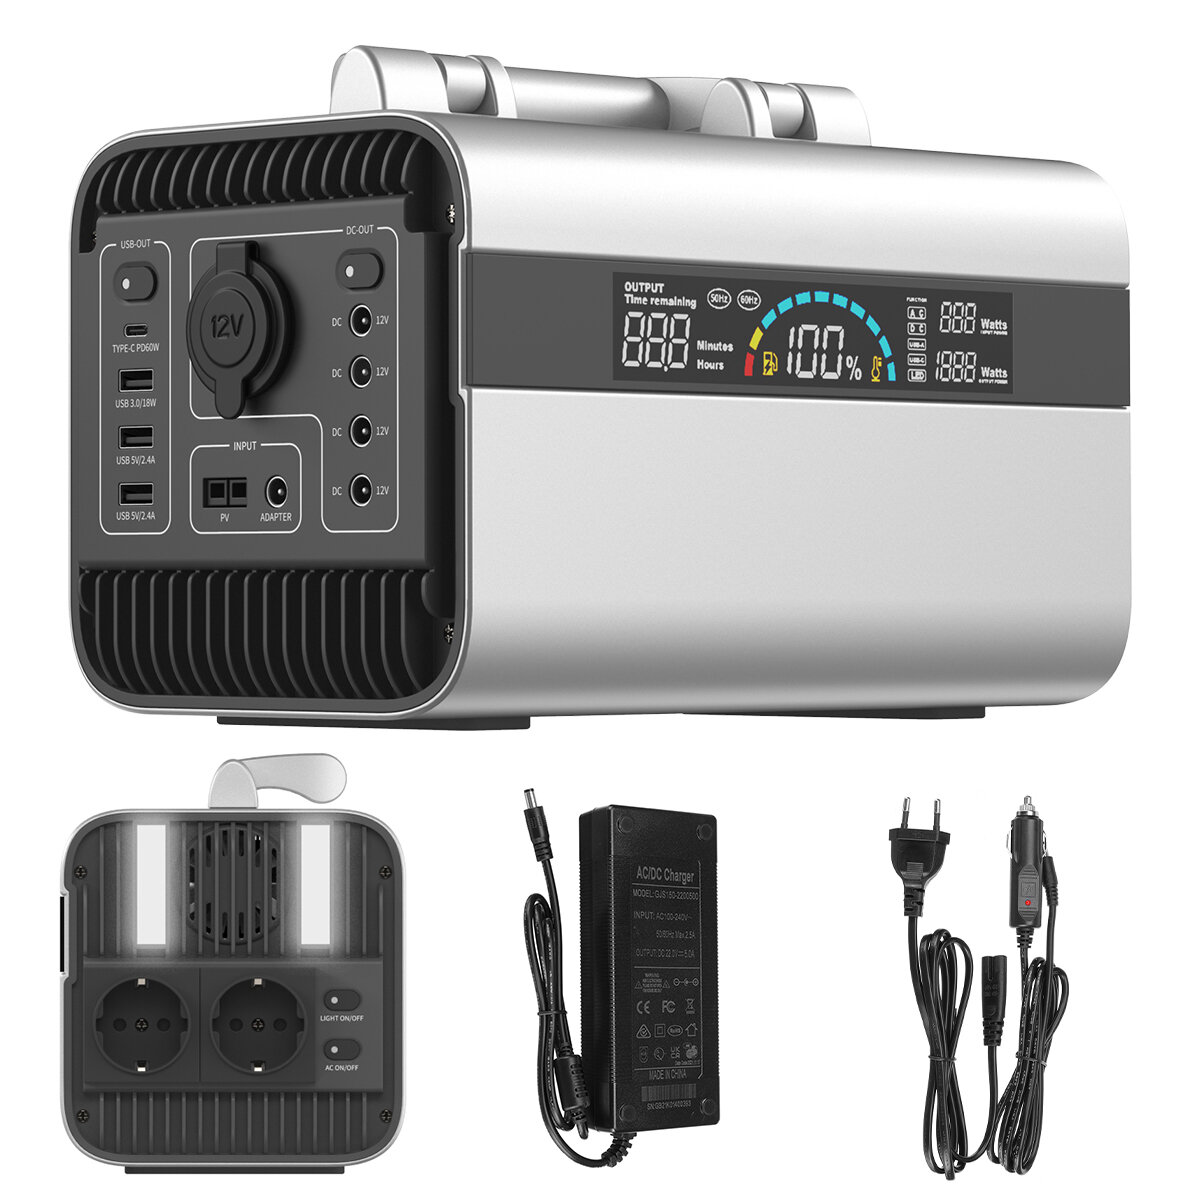 600W Portable Power Station 156000mAh (577Wh) 220V 50Hz Power Emergency Energy Supply For Camping Travel